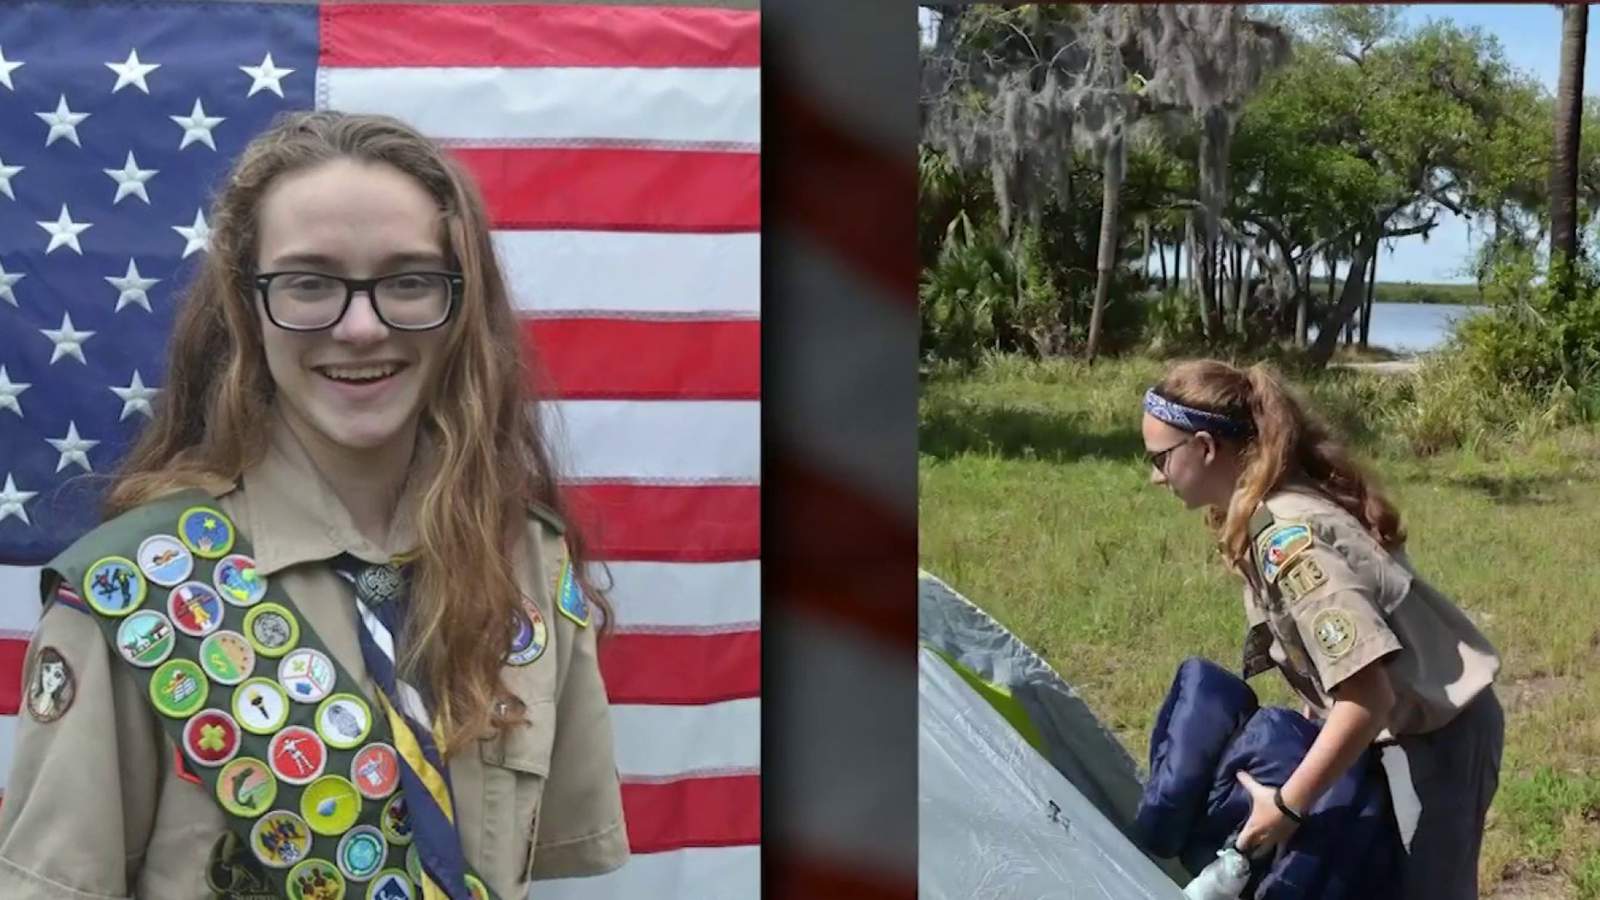 Brevard County teen among first, historic group of girls to reach Eagle Scout